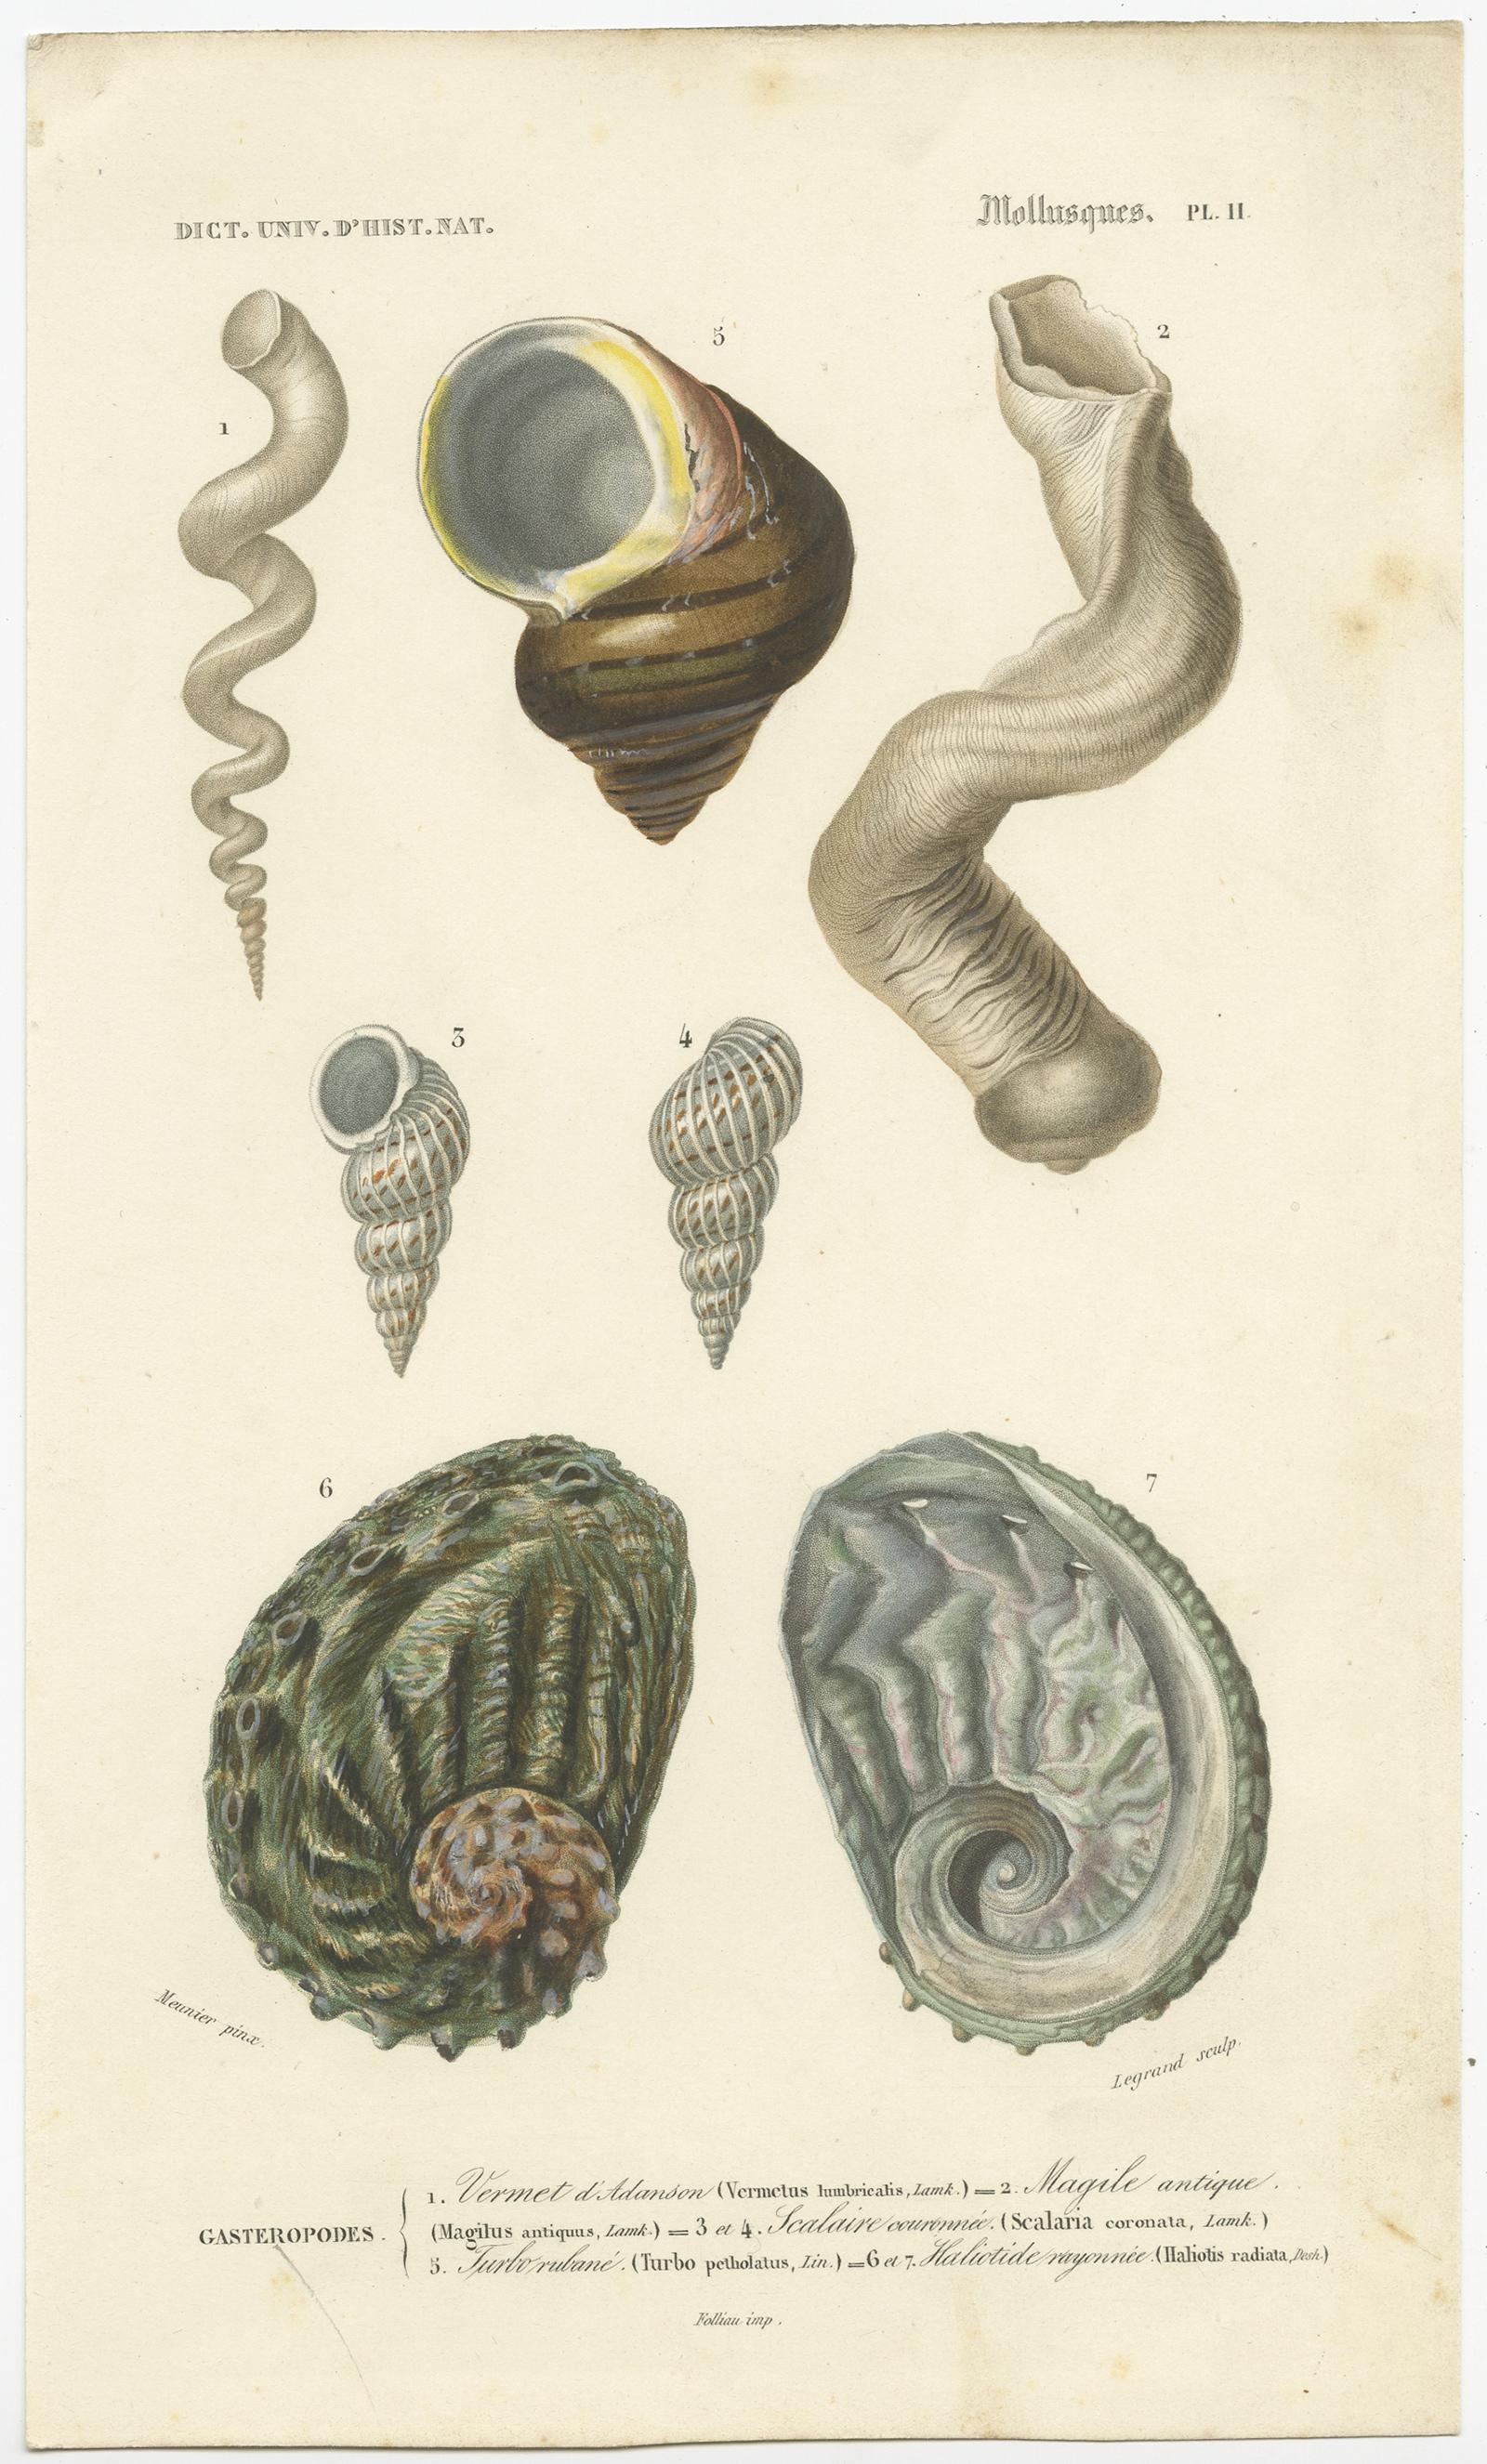 Antique print titled 'Pl. 11 Mollusques'. 

Old print of different types of molluscs. This print originates from 'Dictionnaire Universel d’Histoire Naturelle' by Charles D’Orbigny.

Artists and Engravers: Published by Renard, Martinet & Co.